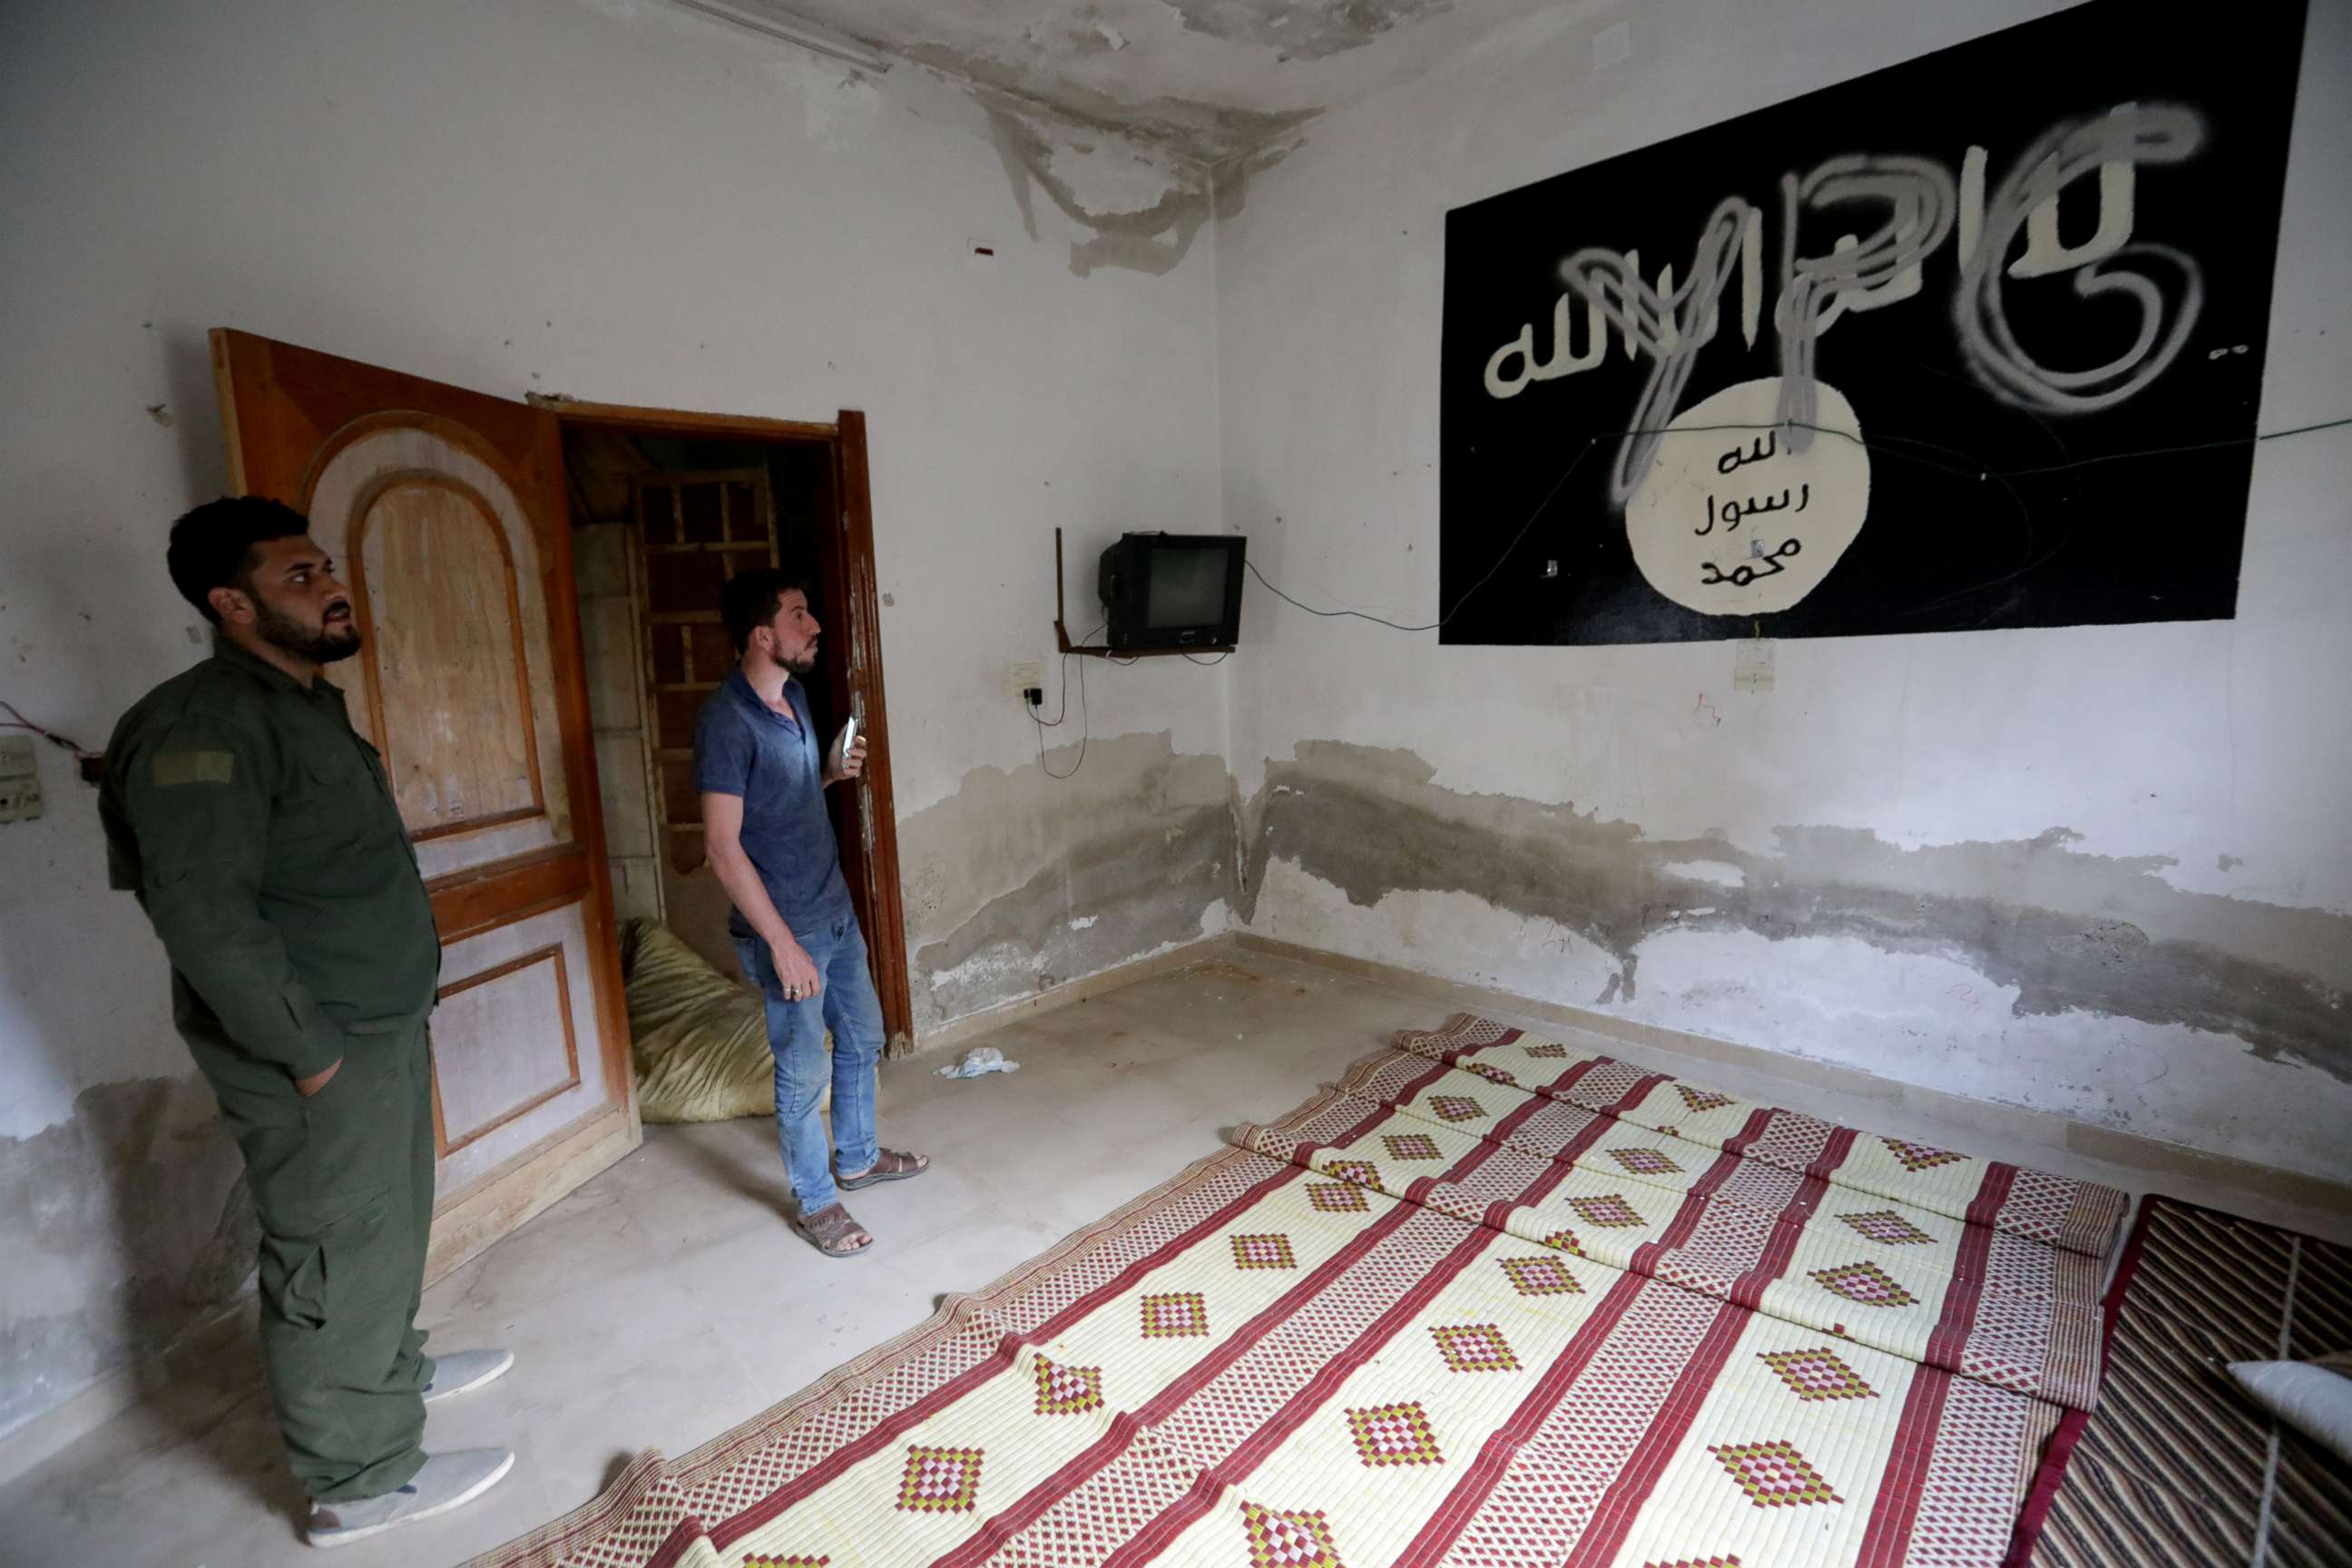 FILE PHOTO: YPG (Kurdish People's Protection Units) is written over a wall painting of ISIS flag inside a house, in the border town of Tal Abyad, Syria, October 16, 2019.